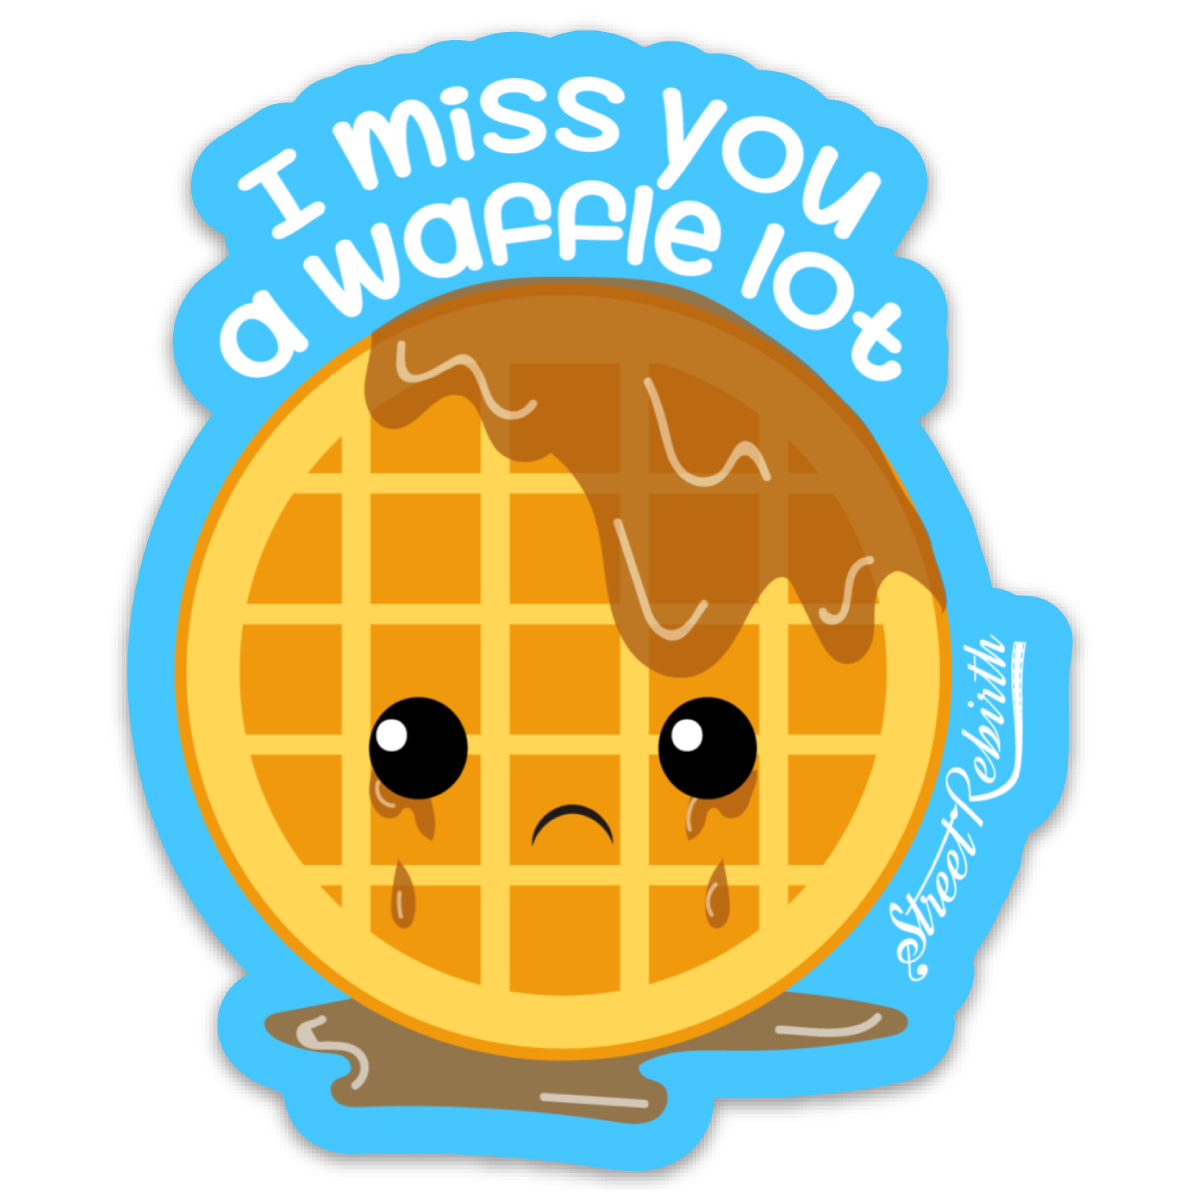 I MISS YOU A WAFFLE ALOT STICKER – ONE 4 INCH WATER PROOF VINYL STICKER – FOR HYDRO FLASK, SKATEBOARD, LAPTOP, PLANNER, CAR, COLLECTING, GIFTING